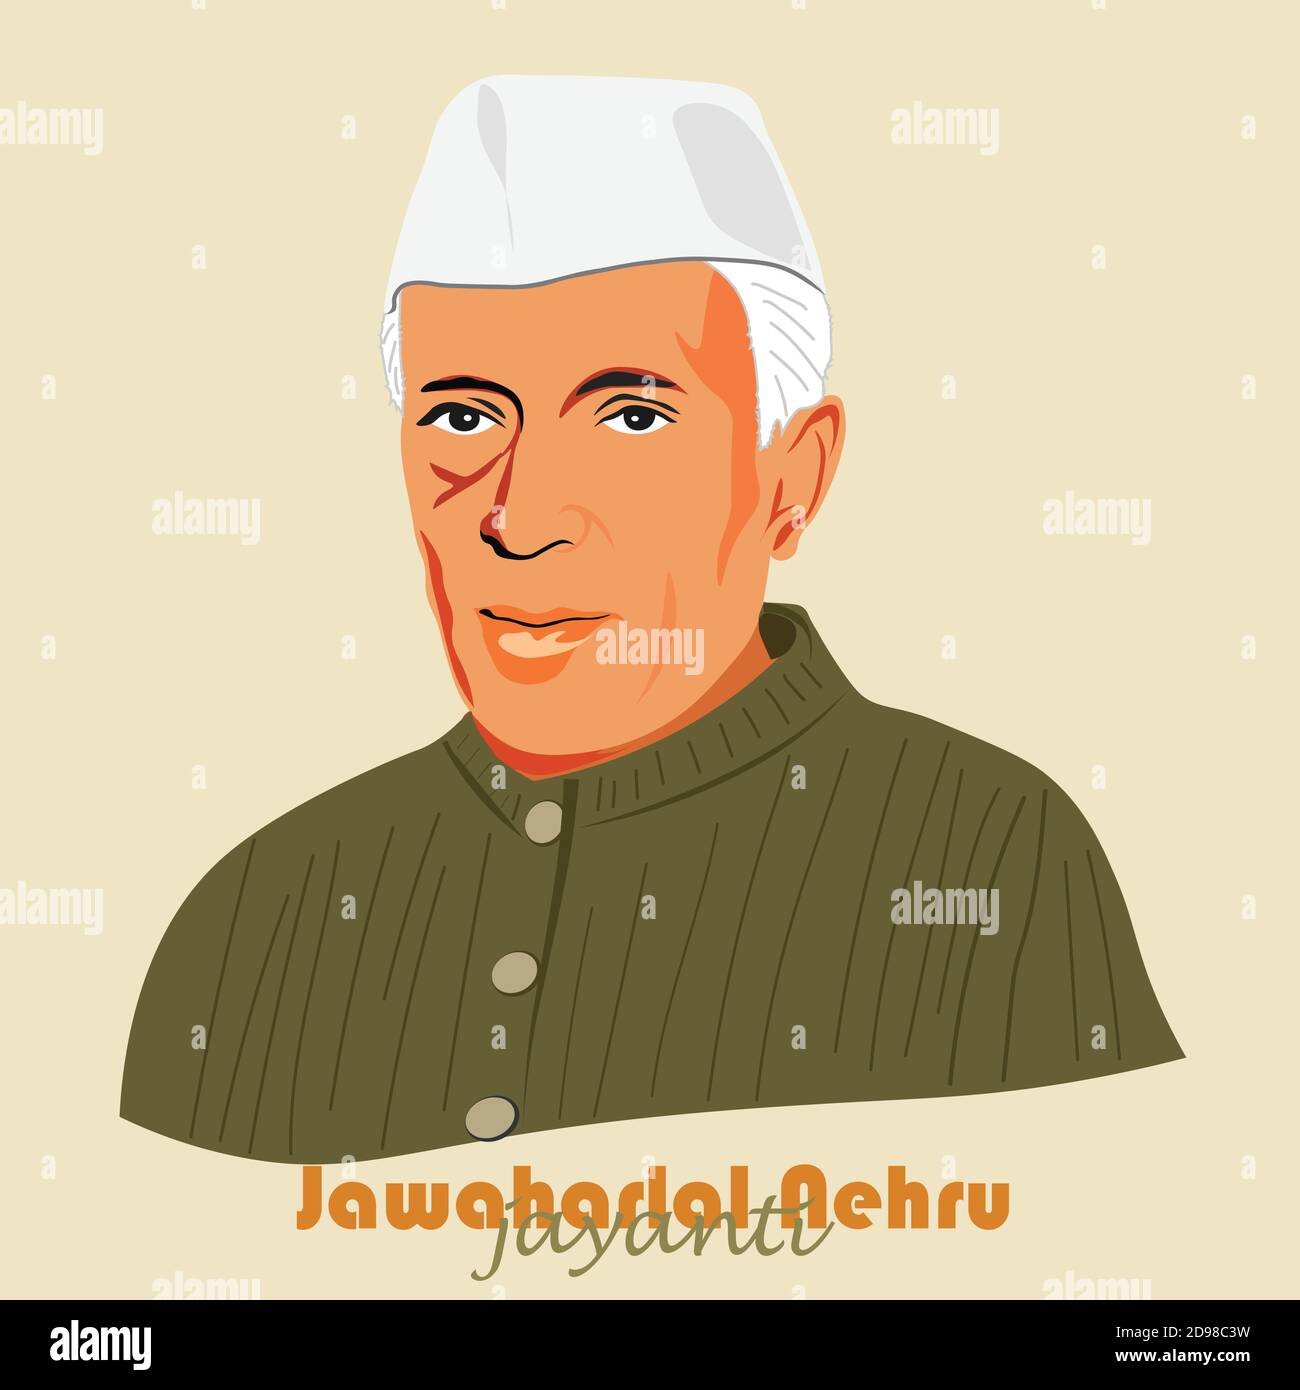 GK Questions and Answers on Jawaharlal Nehru